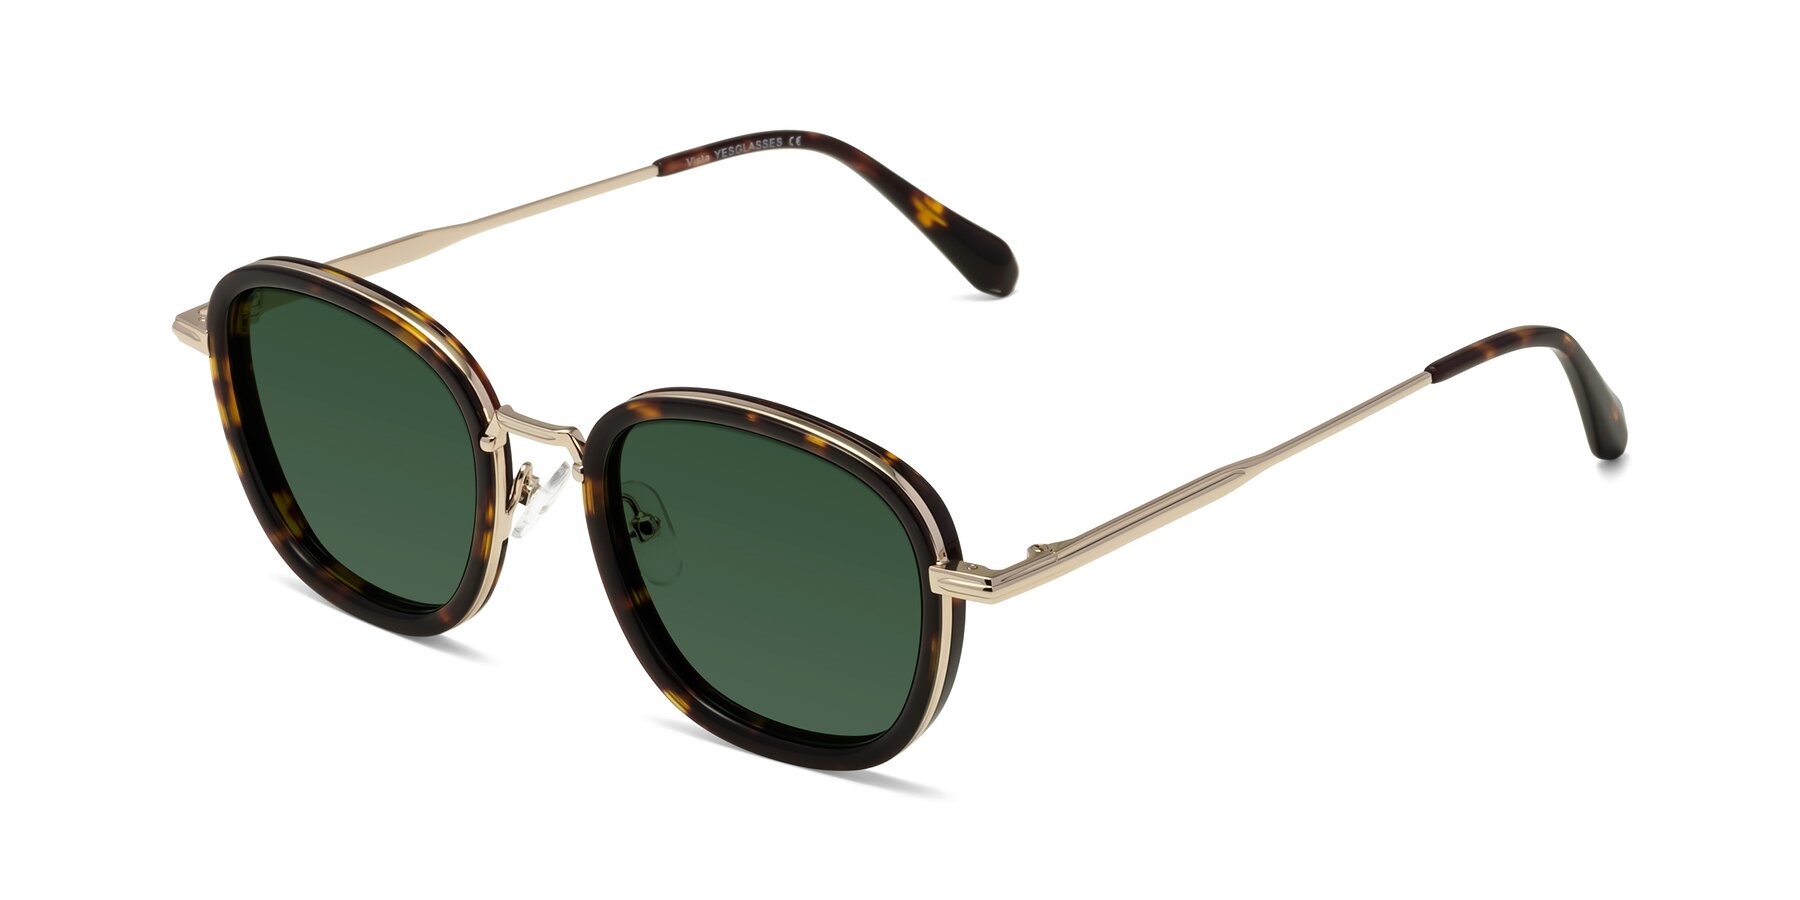 Angle of Vista in Tortoise-Light Gold with Green Tinted Lenses